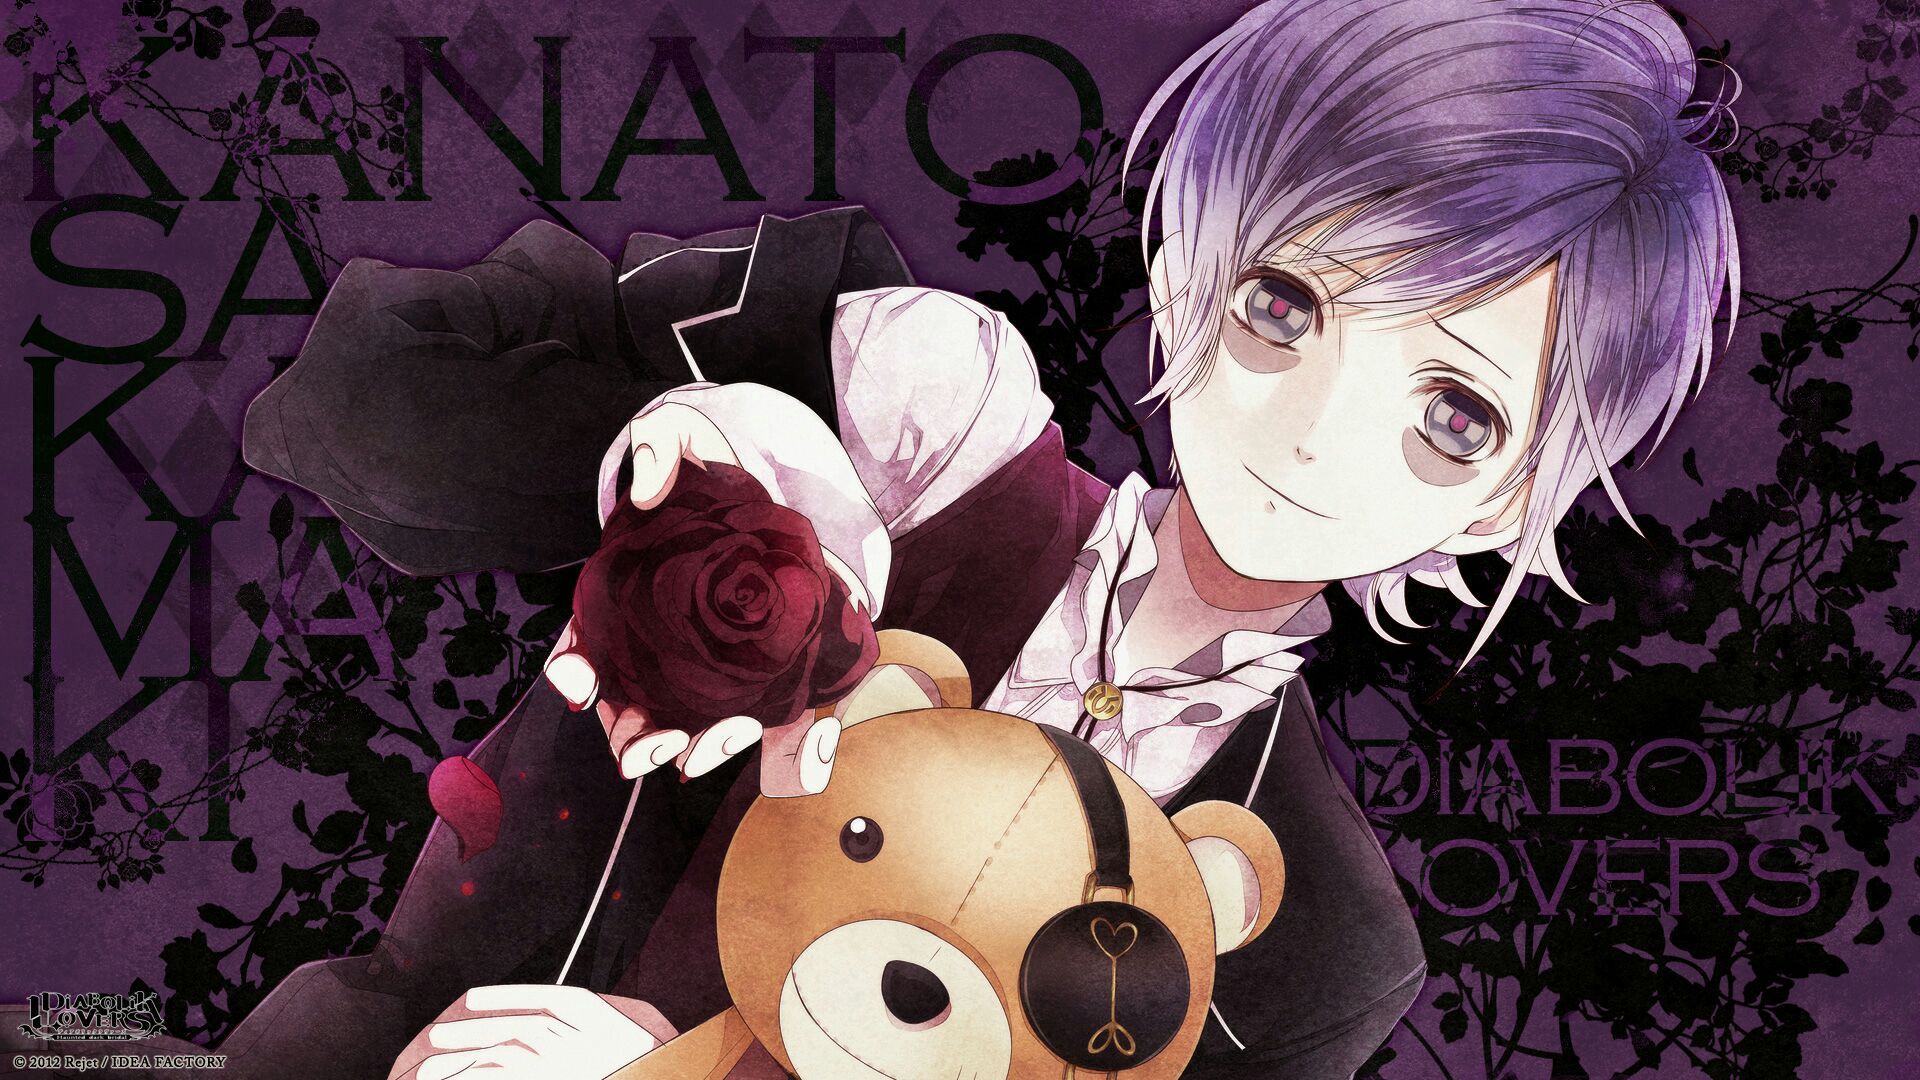 ❤ CUTE PICTURES ❤ 30 [ Diabolik lovers, Sakamaki Brothers Special ]